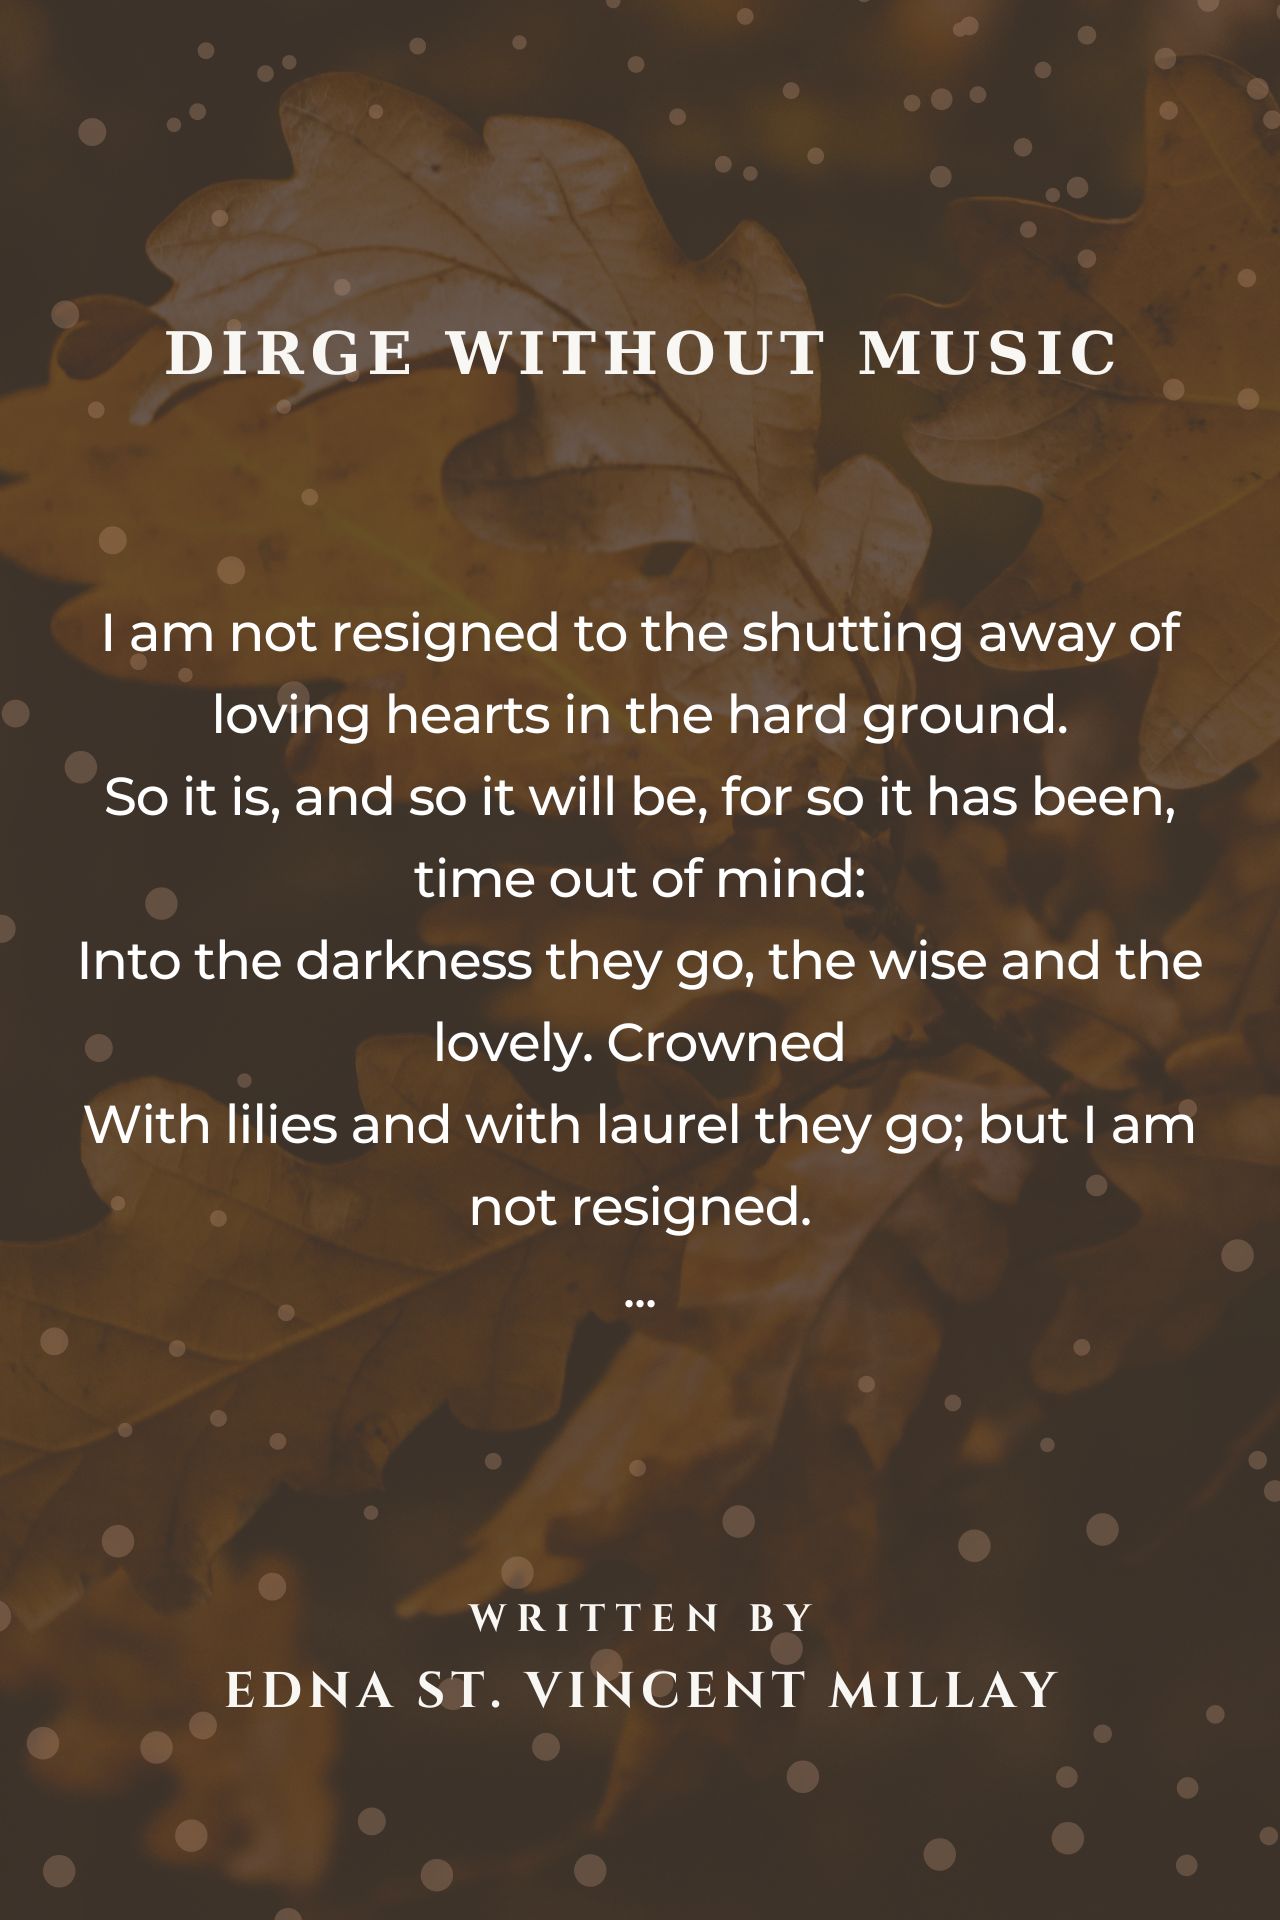 Dirge Without Music